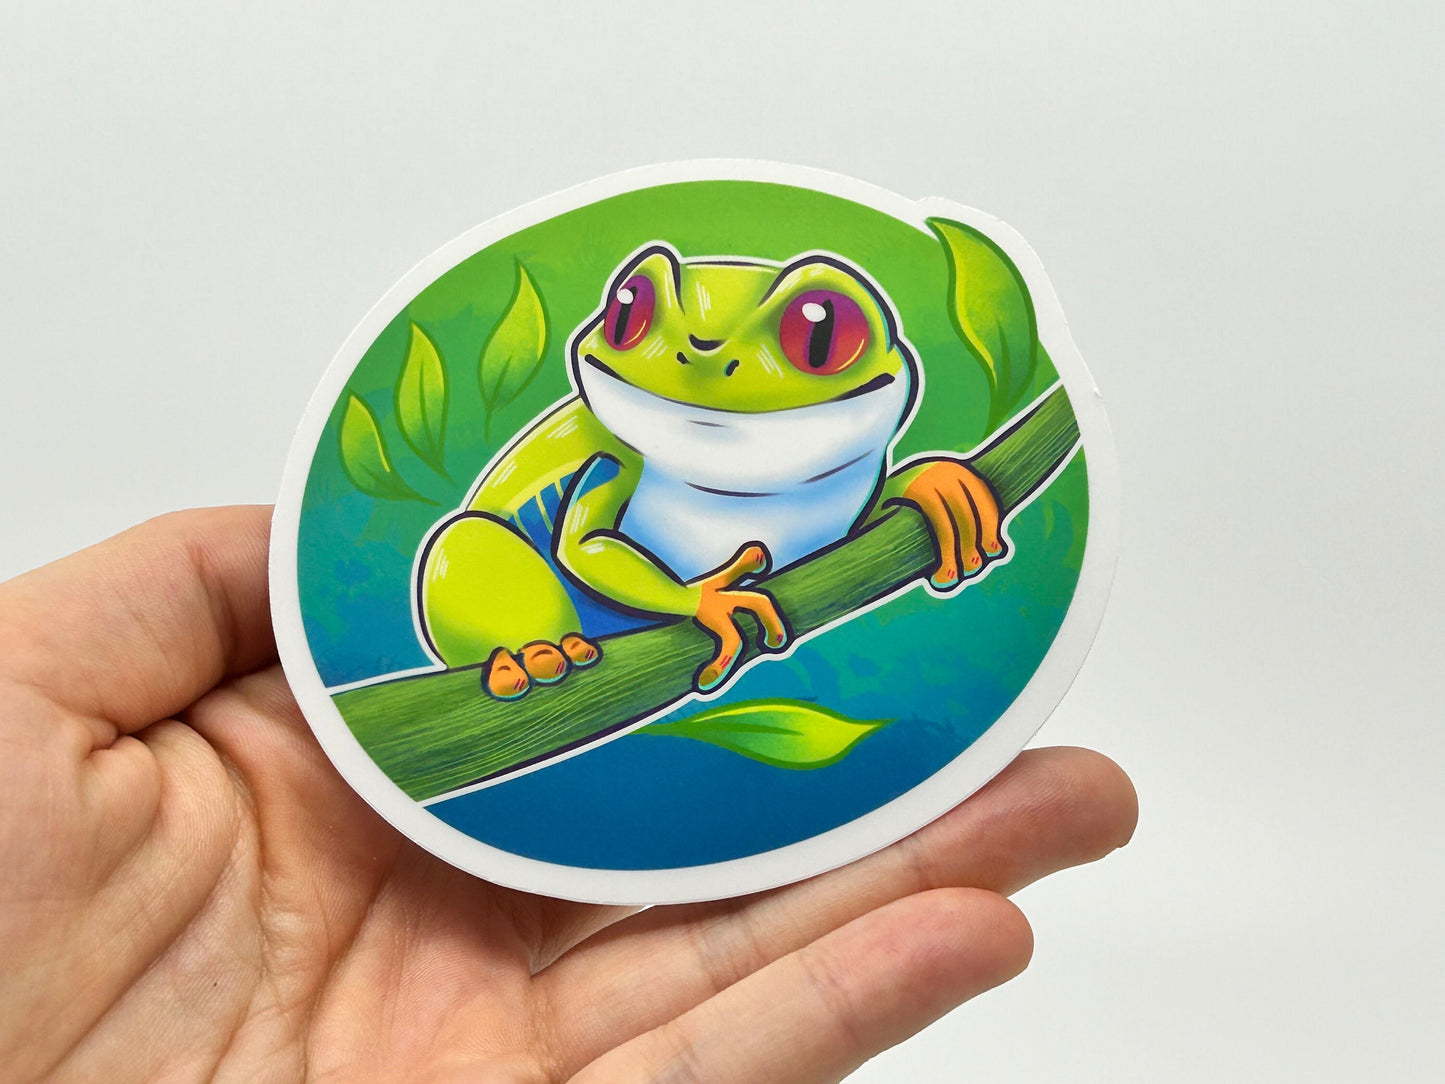 Cute Vinyl Red-Eyed Green Tree Frog Sticker - Perfect for Laptop, Sticker Collectors & Wildlife Enthusiasts